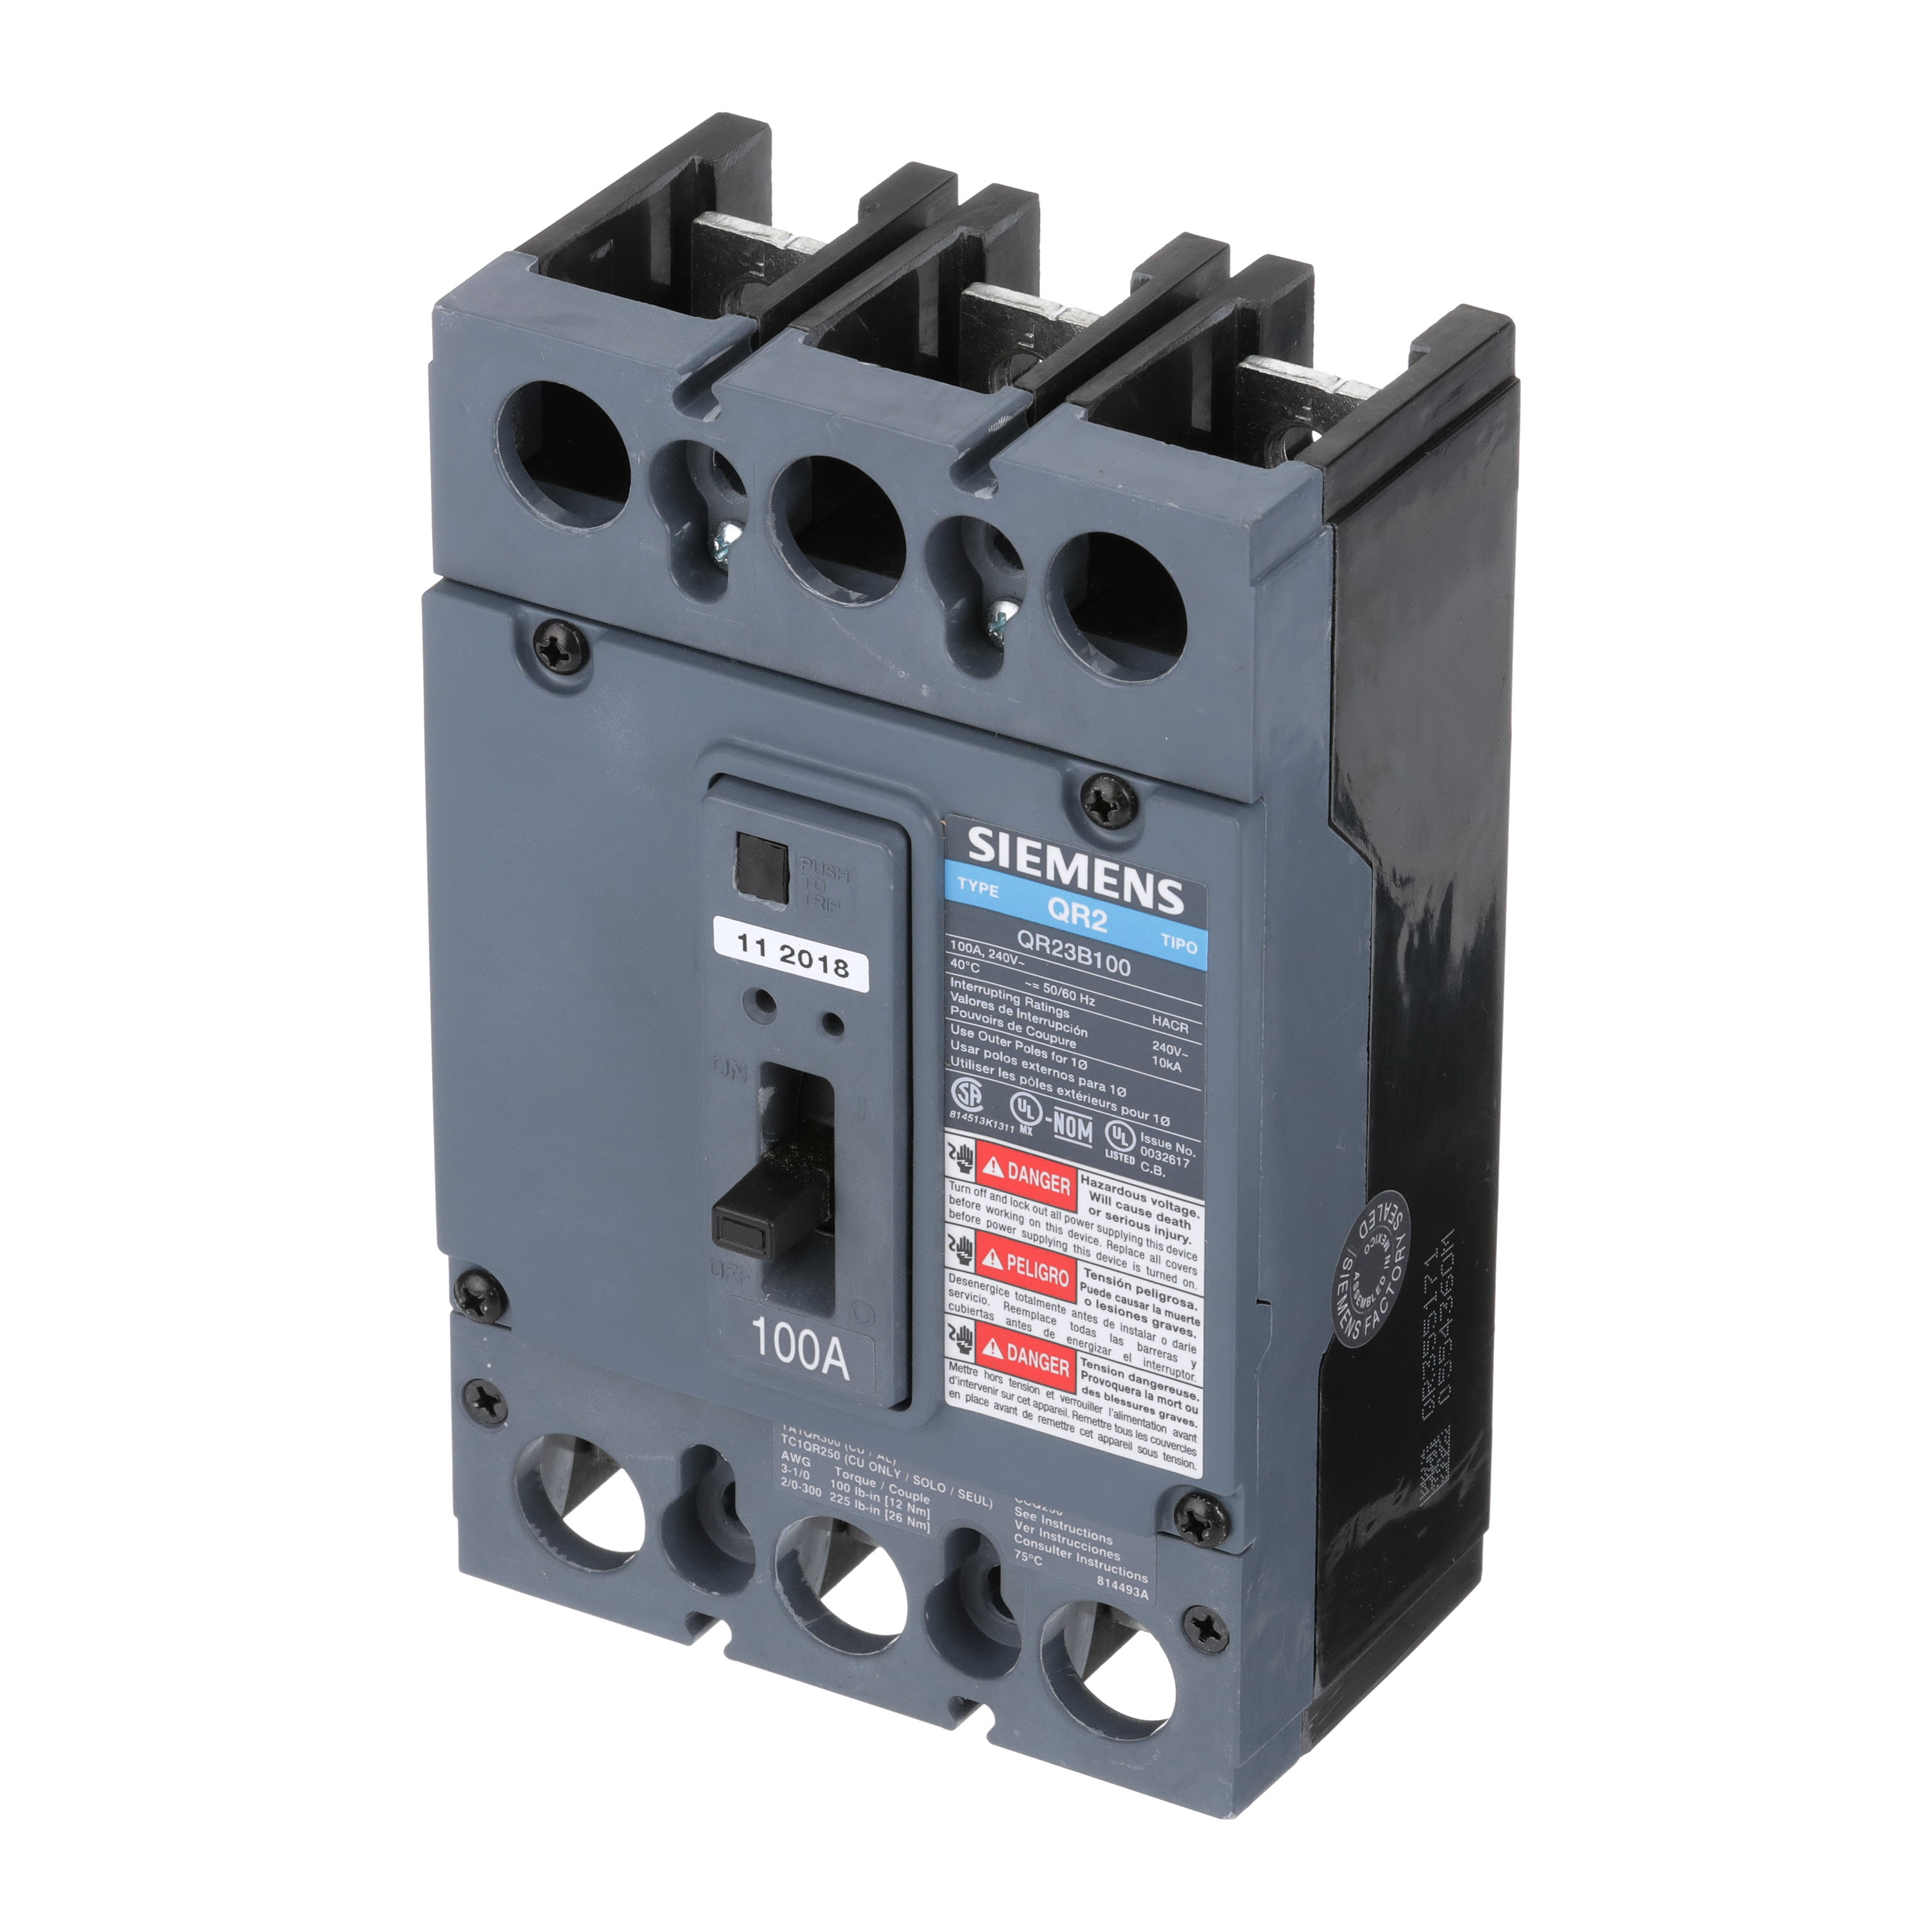 SIEMENS LOW VOLTAGE MOLDED CASE CIRCUIT BREAKER WITH THERMAL - MAGNETIC TRIP. QR FRAME STANDARD 40C BREAKER. 100A 3-POLE (10KA AT 240V). SPECIAL FEATURES NO LUGS INSTALLED.